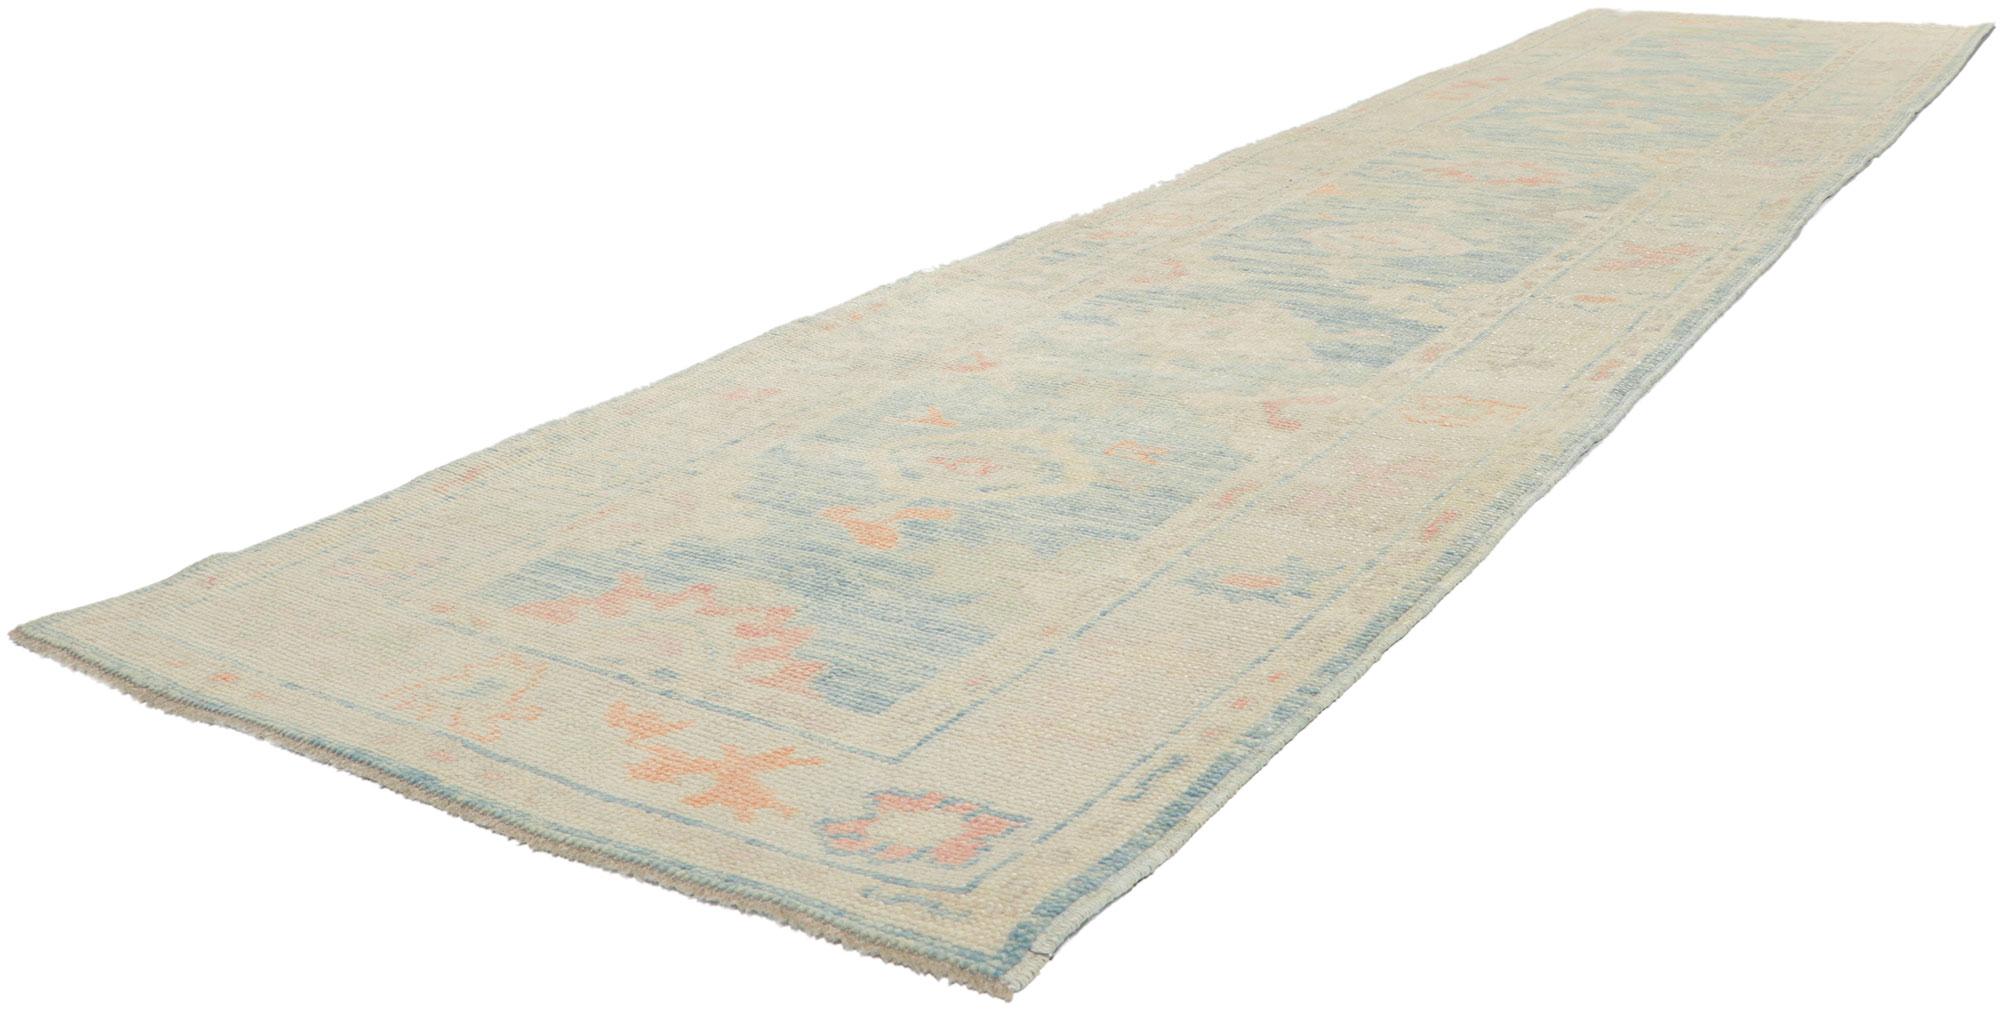 53824 New Contemporary Turkish Oushak rug runner, 02'10 x 13'00. This hand-knotted wool contemporary Turkish Oushak runner features an all-over botanical pattern composed of amorphous organic motifs spread across an abrashed sky blue field. It is